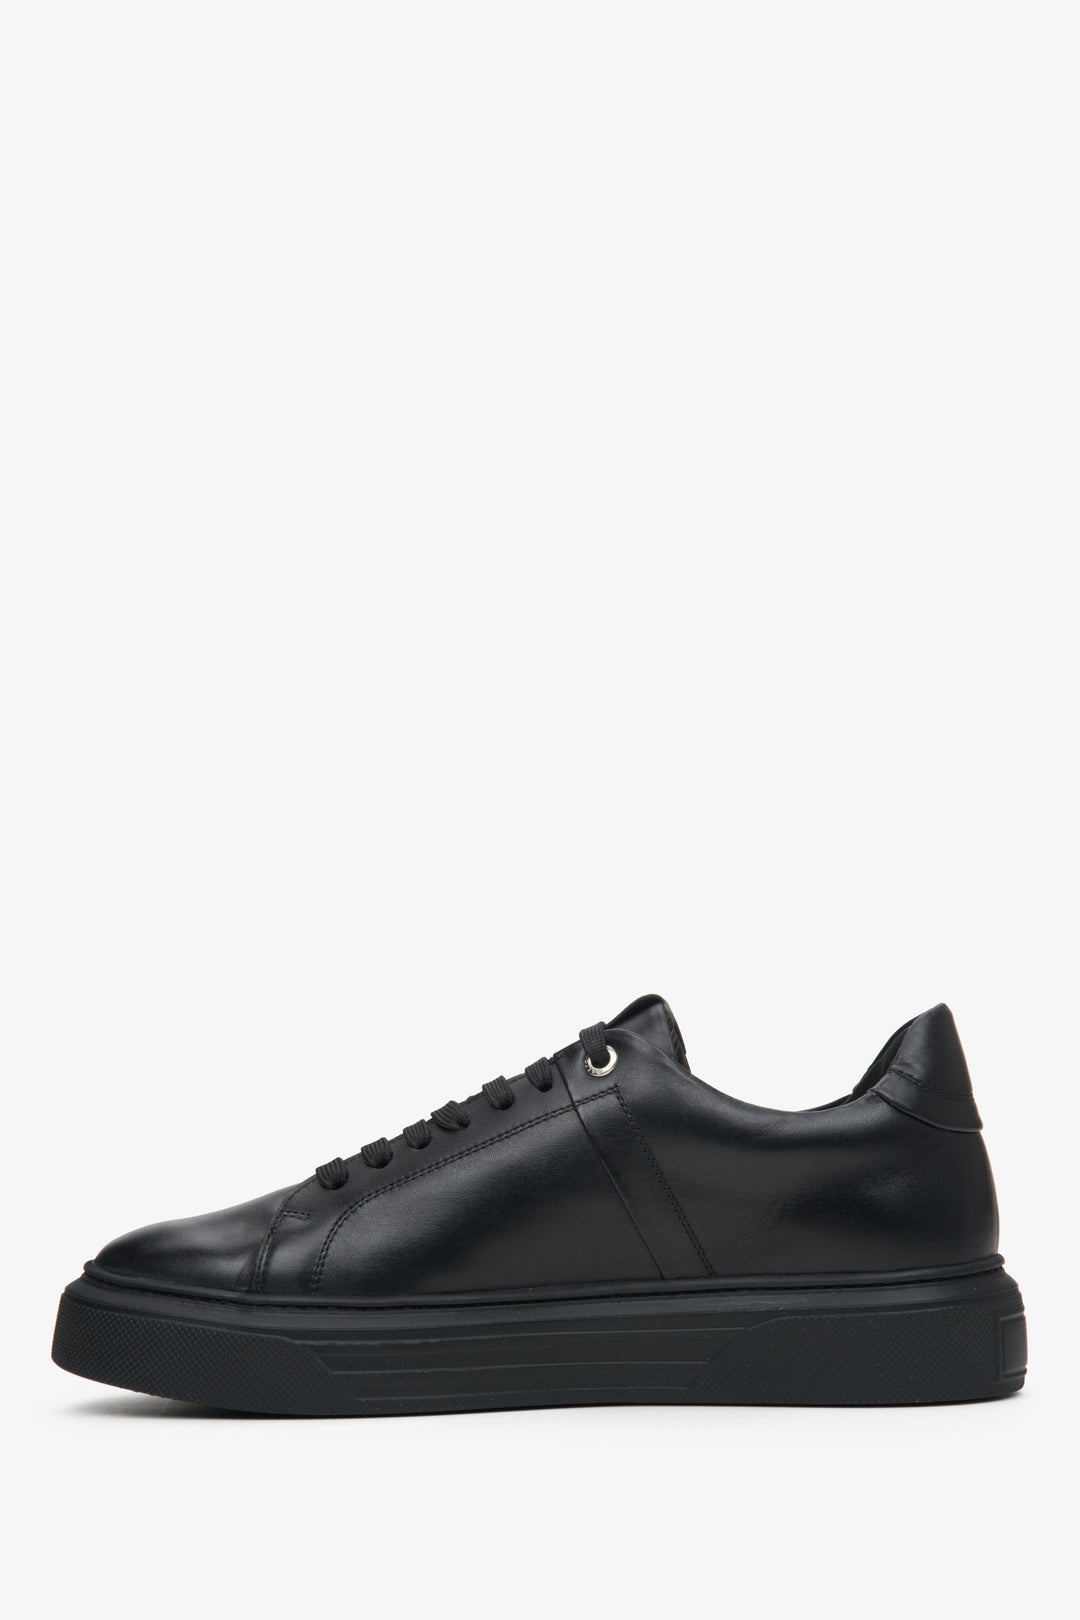 Black Estro men's sneakers made from natural leather with lacing - profile view.